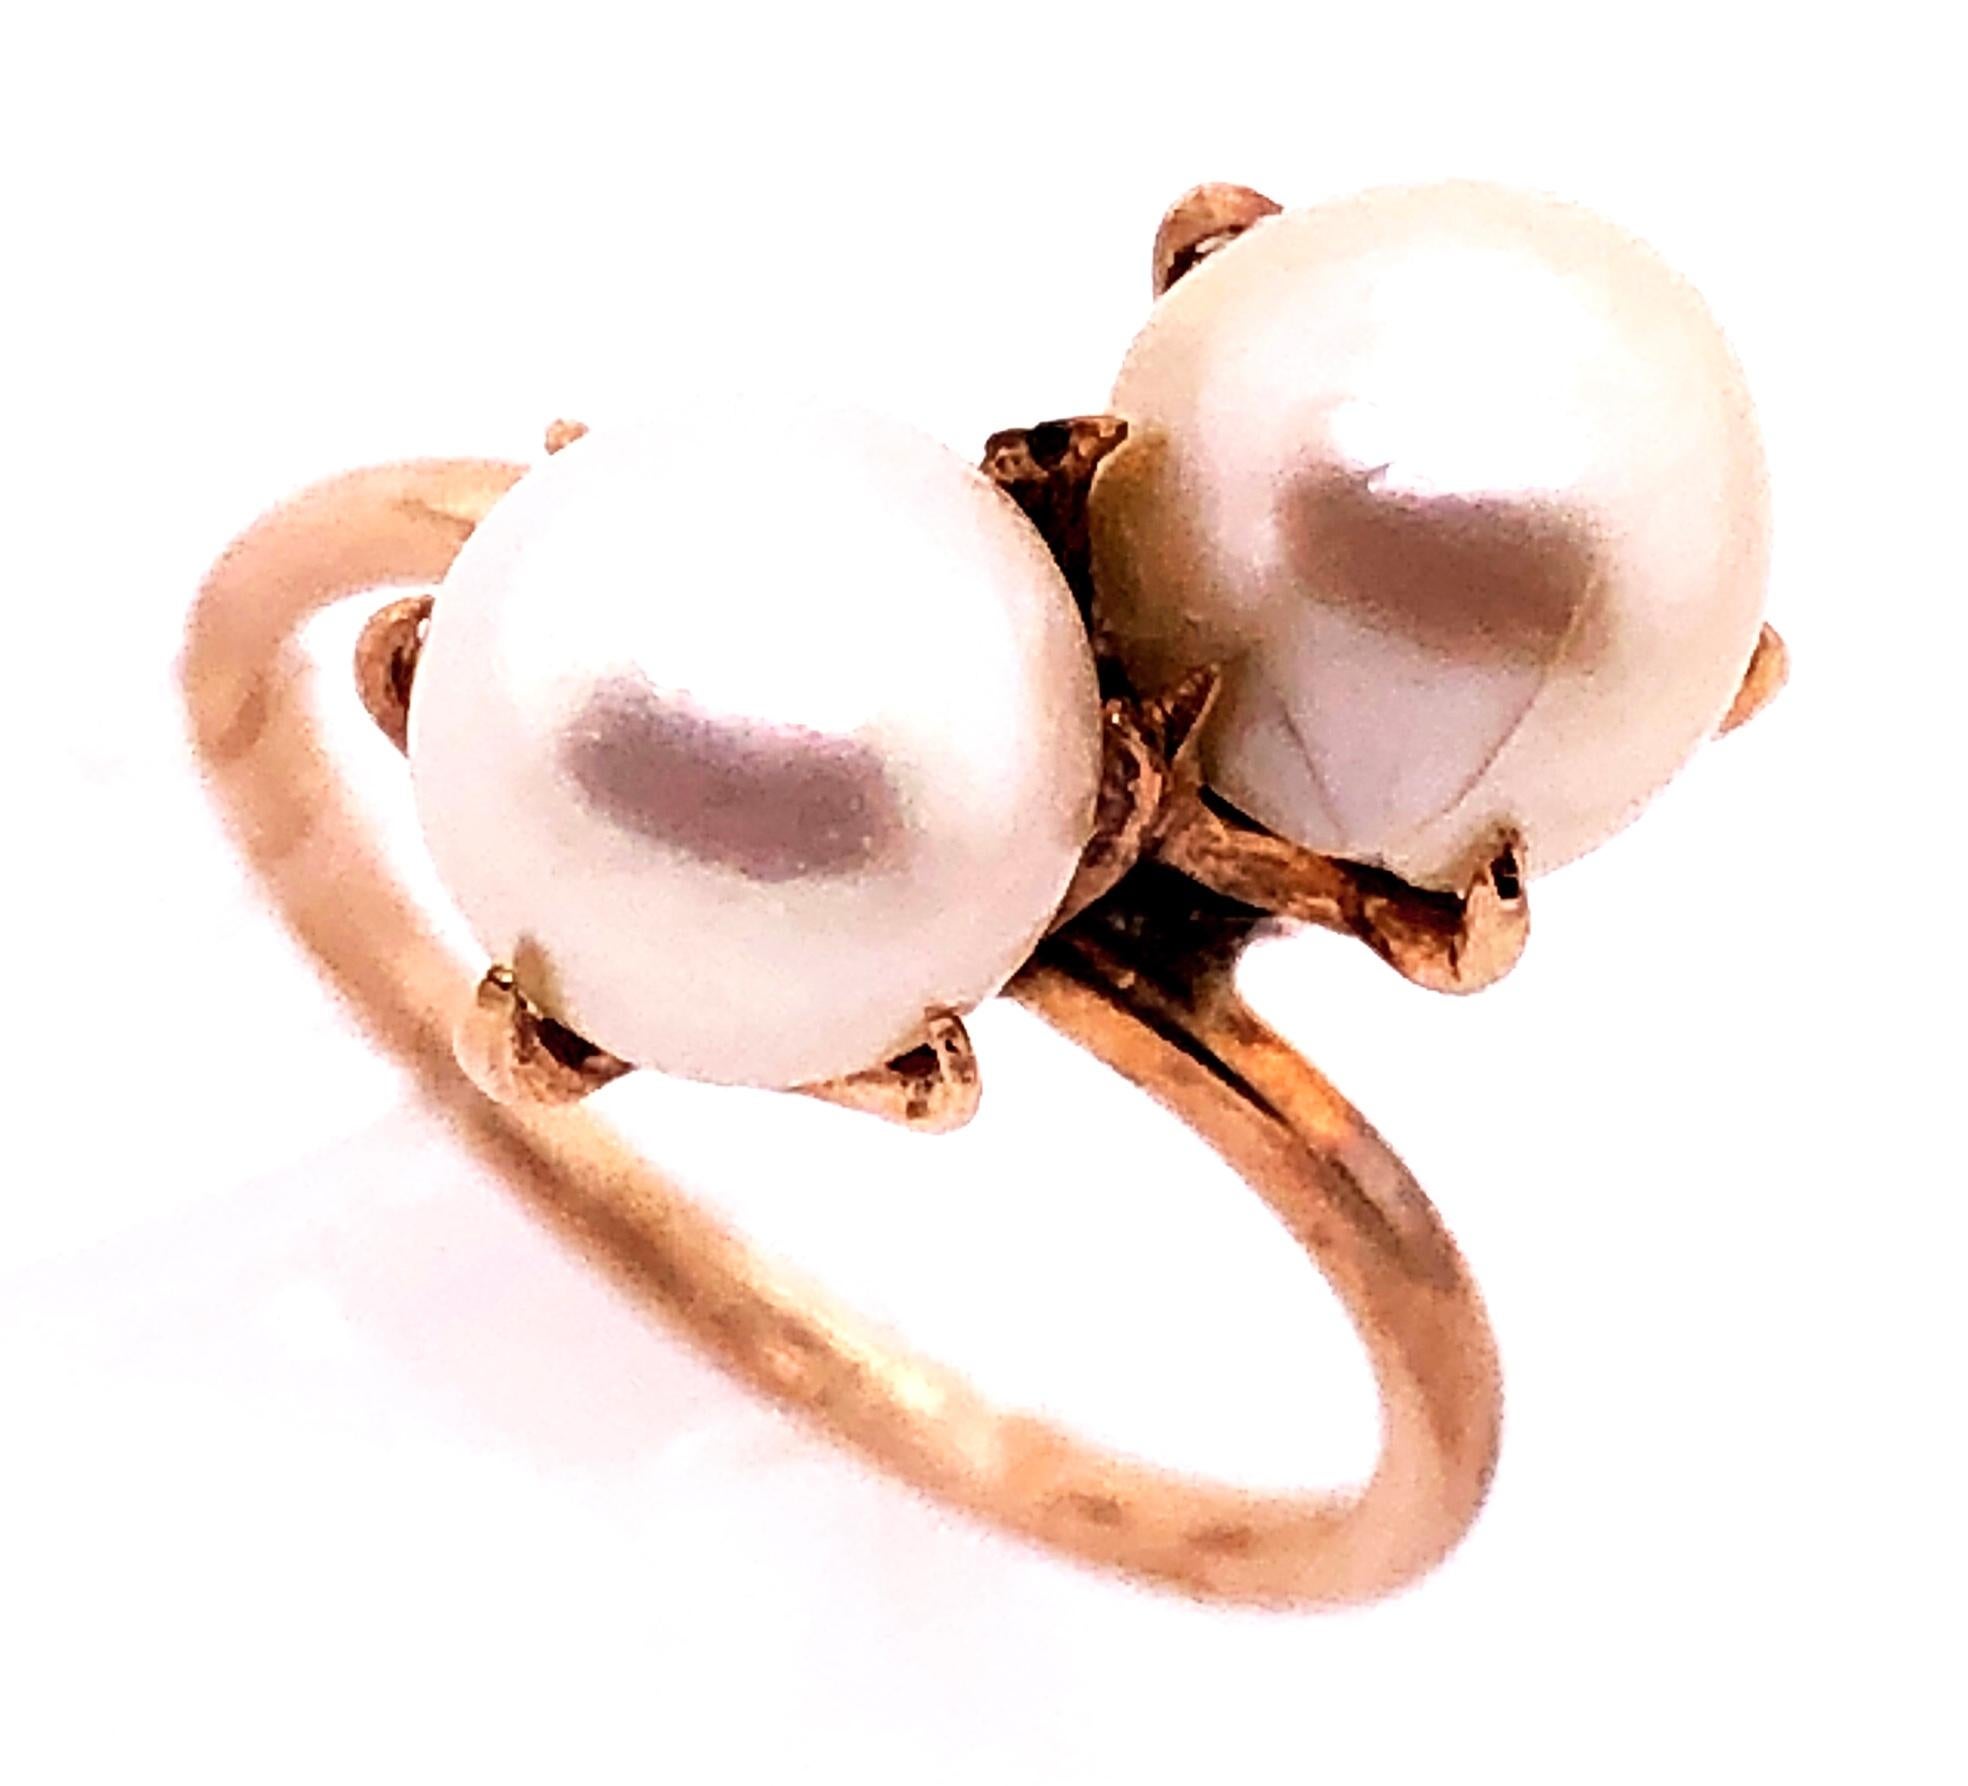 14 Karat Yellow Gold Double Pearl Ring.
Size 5.5
3.2 grams total weight.
5.37mm pearl size